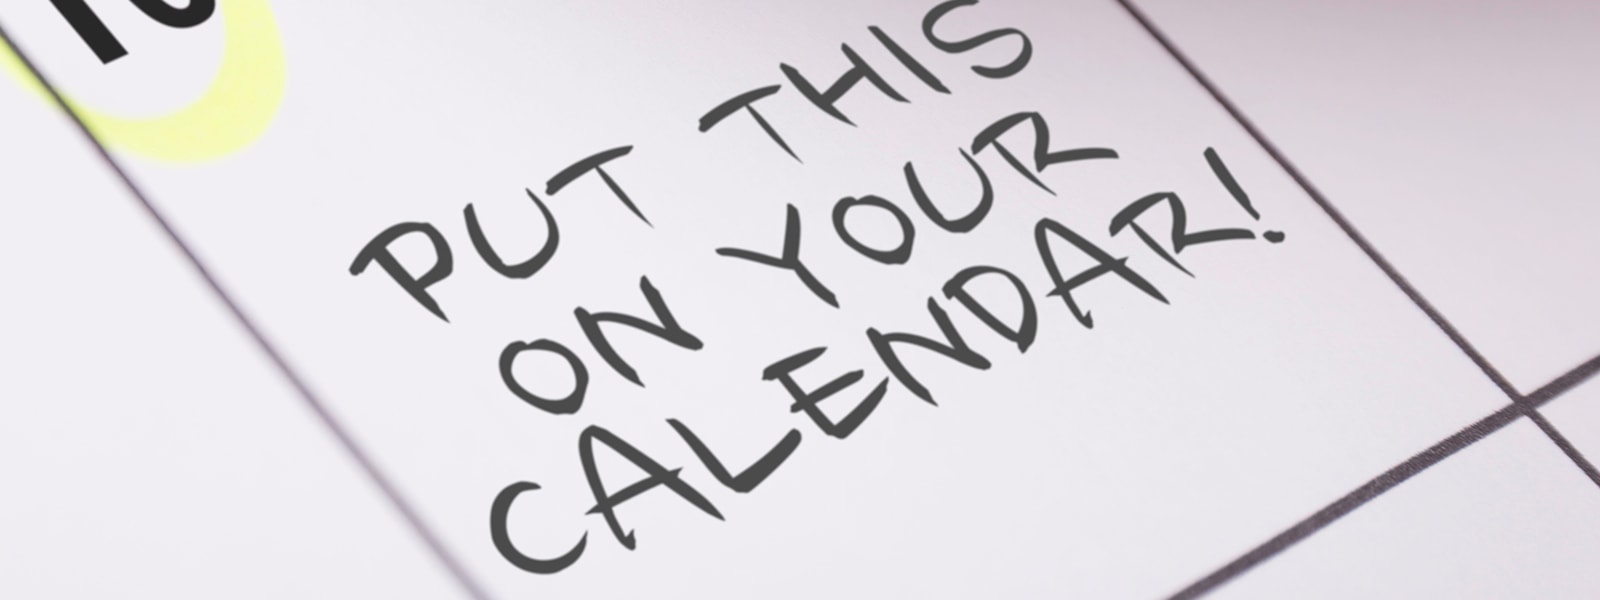 a message on a calendar that says" Put this on your calendar" 